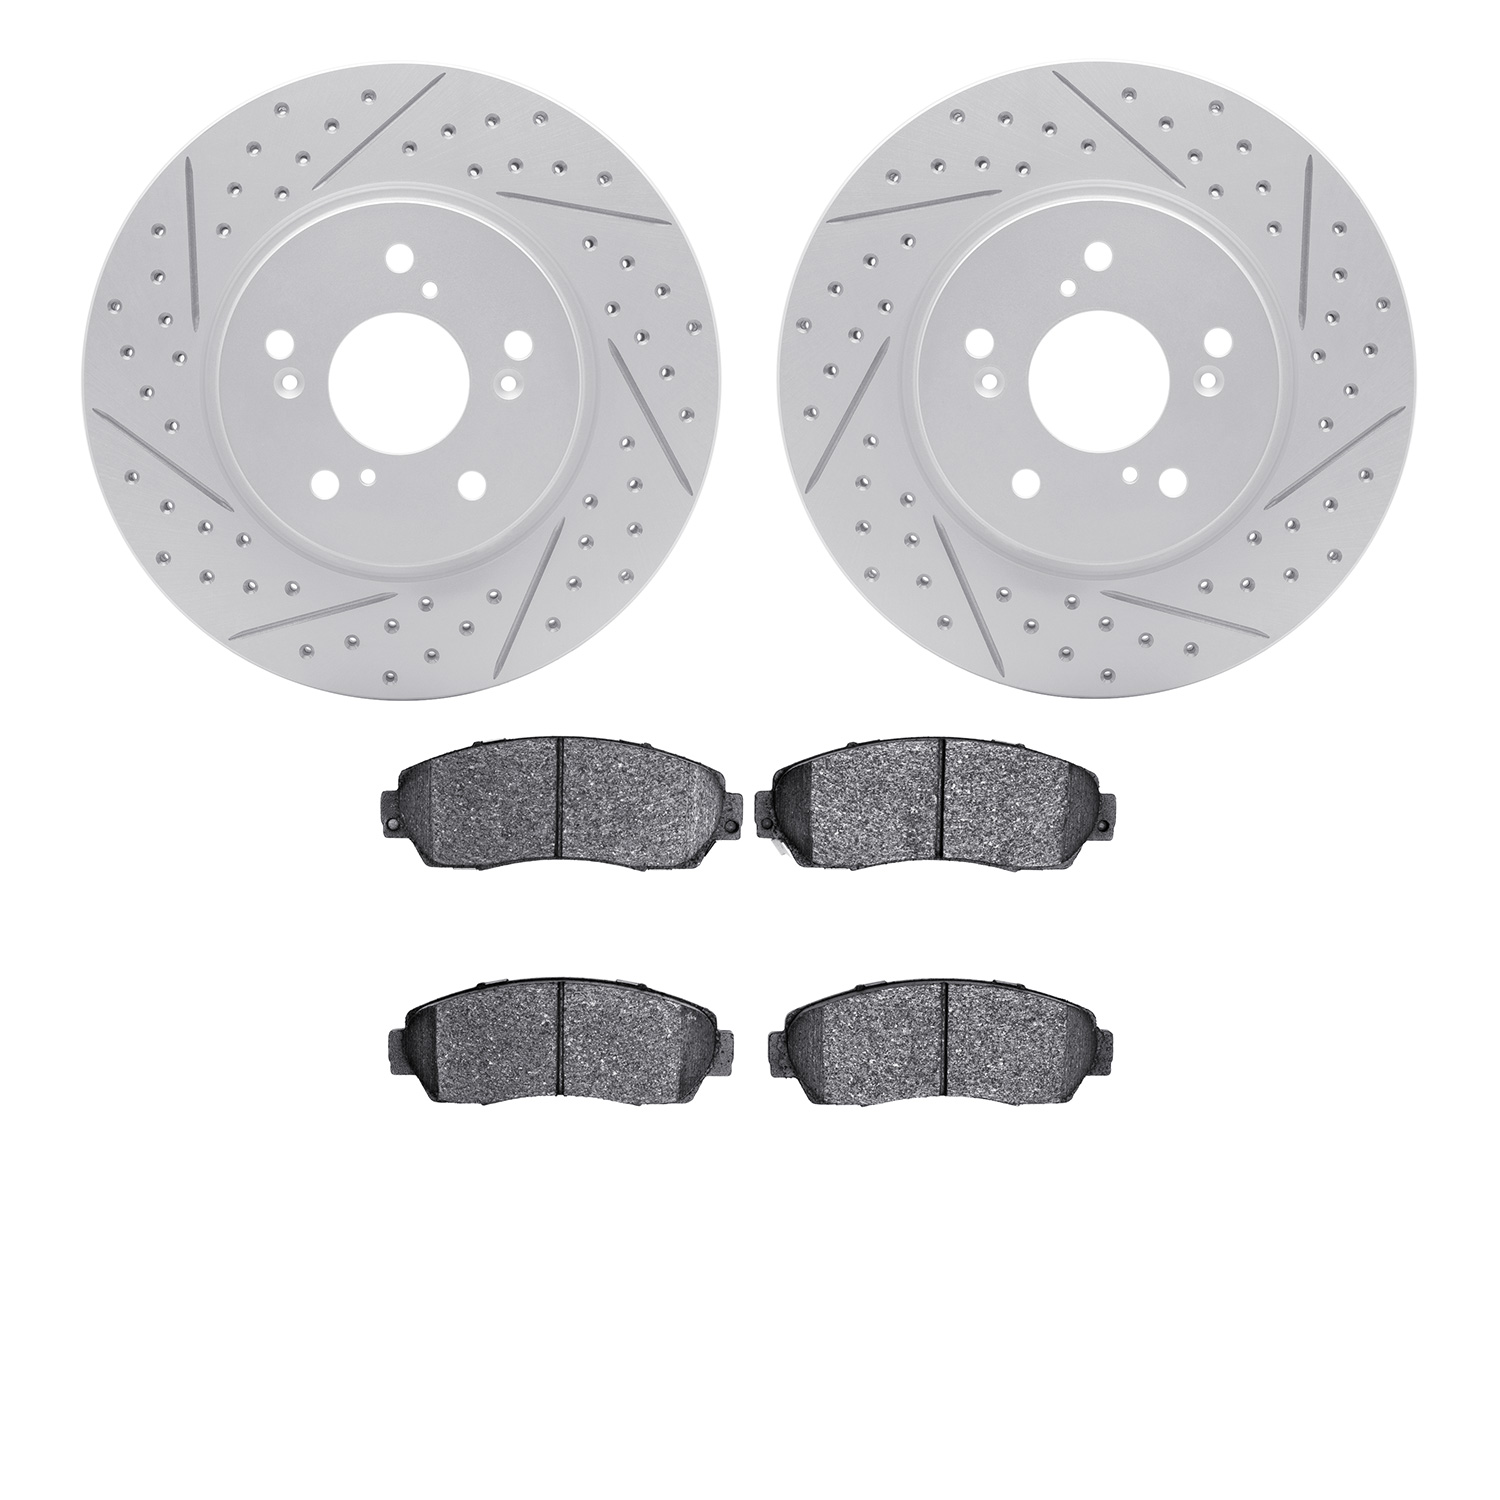 2502-59072 Geoperformance Drilled/Slotted Rotors w/5000 Advanced Brake Pads Kit, 2007-2016 Acura/Honda, Position: Front